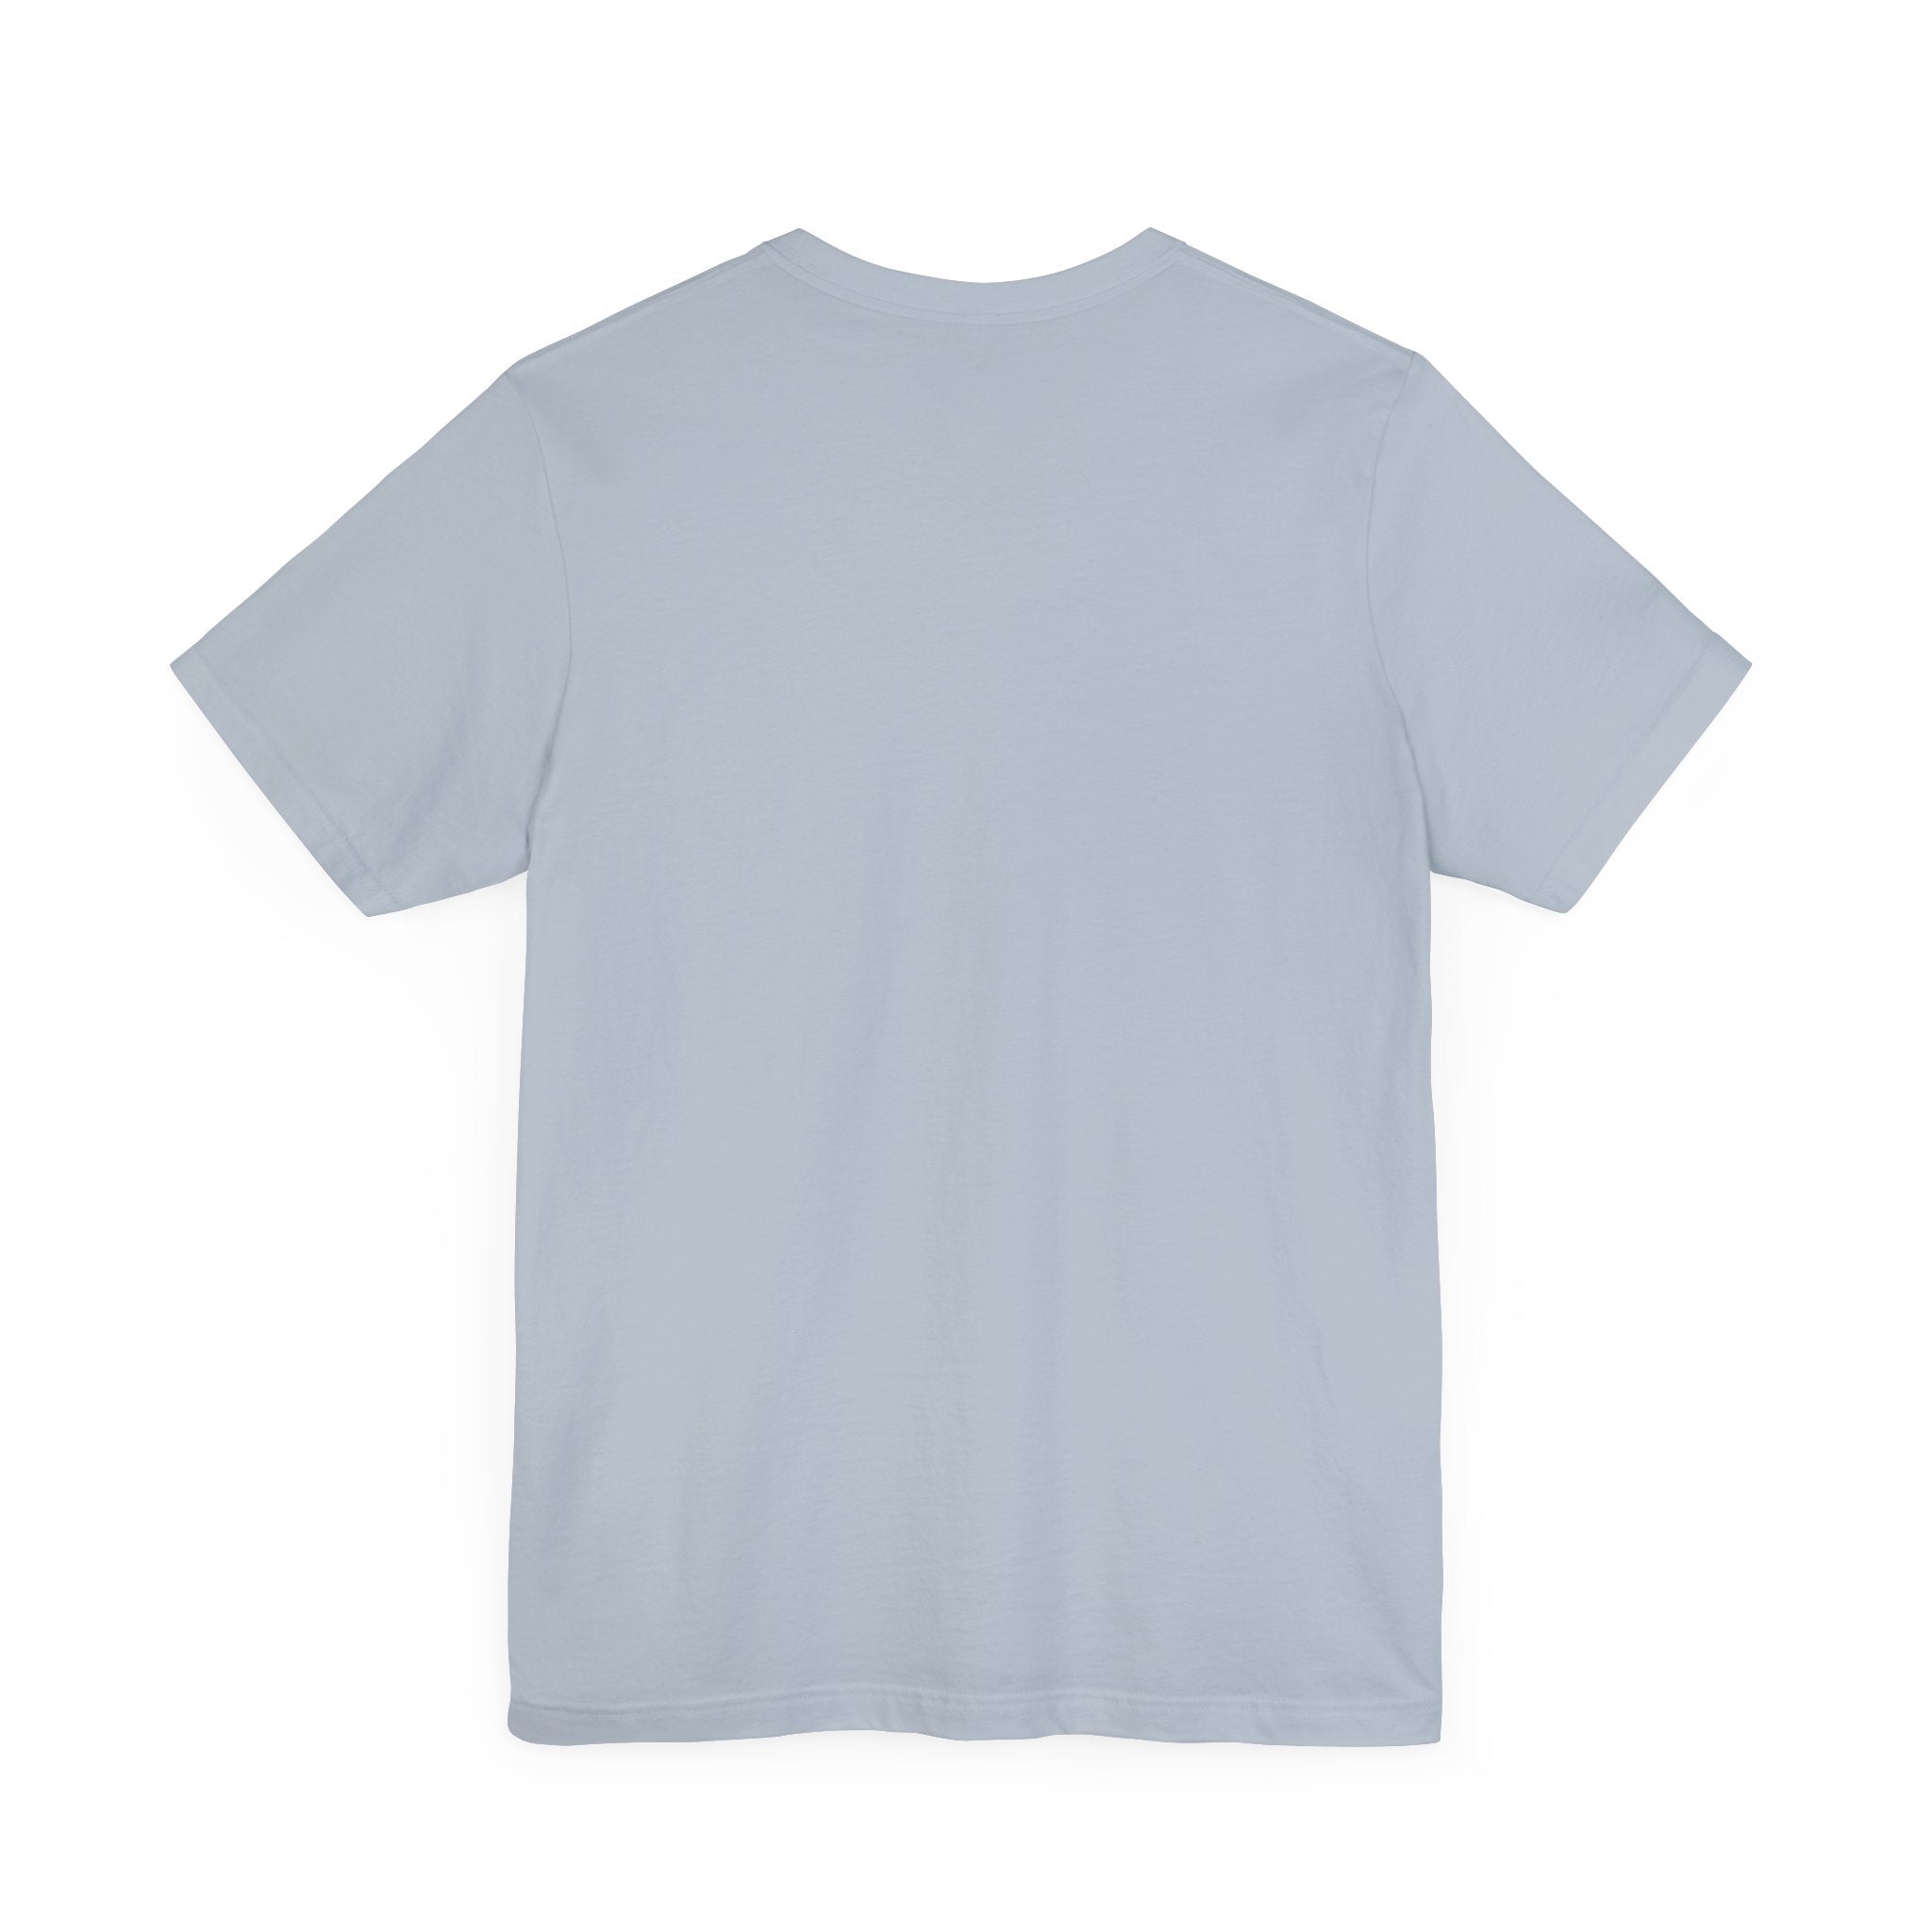 A plain light gray Binary Rain Cloud - T-Shirt with short sleeves, shown from the back, crafted from Airlume combed and ring-spun cotton.